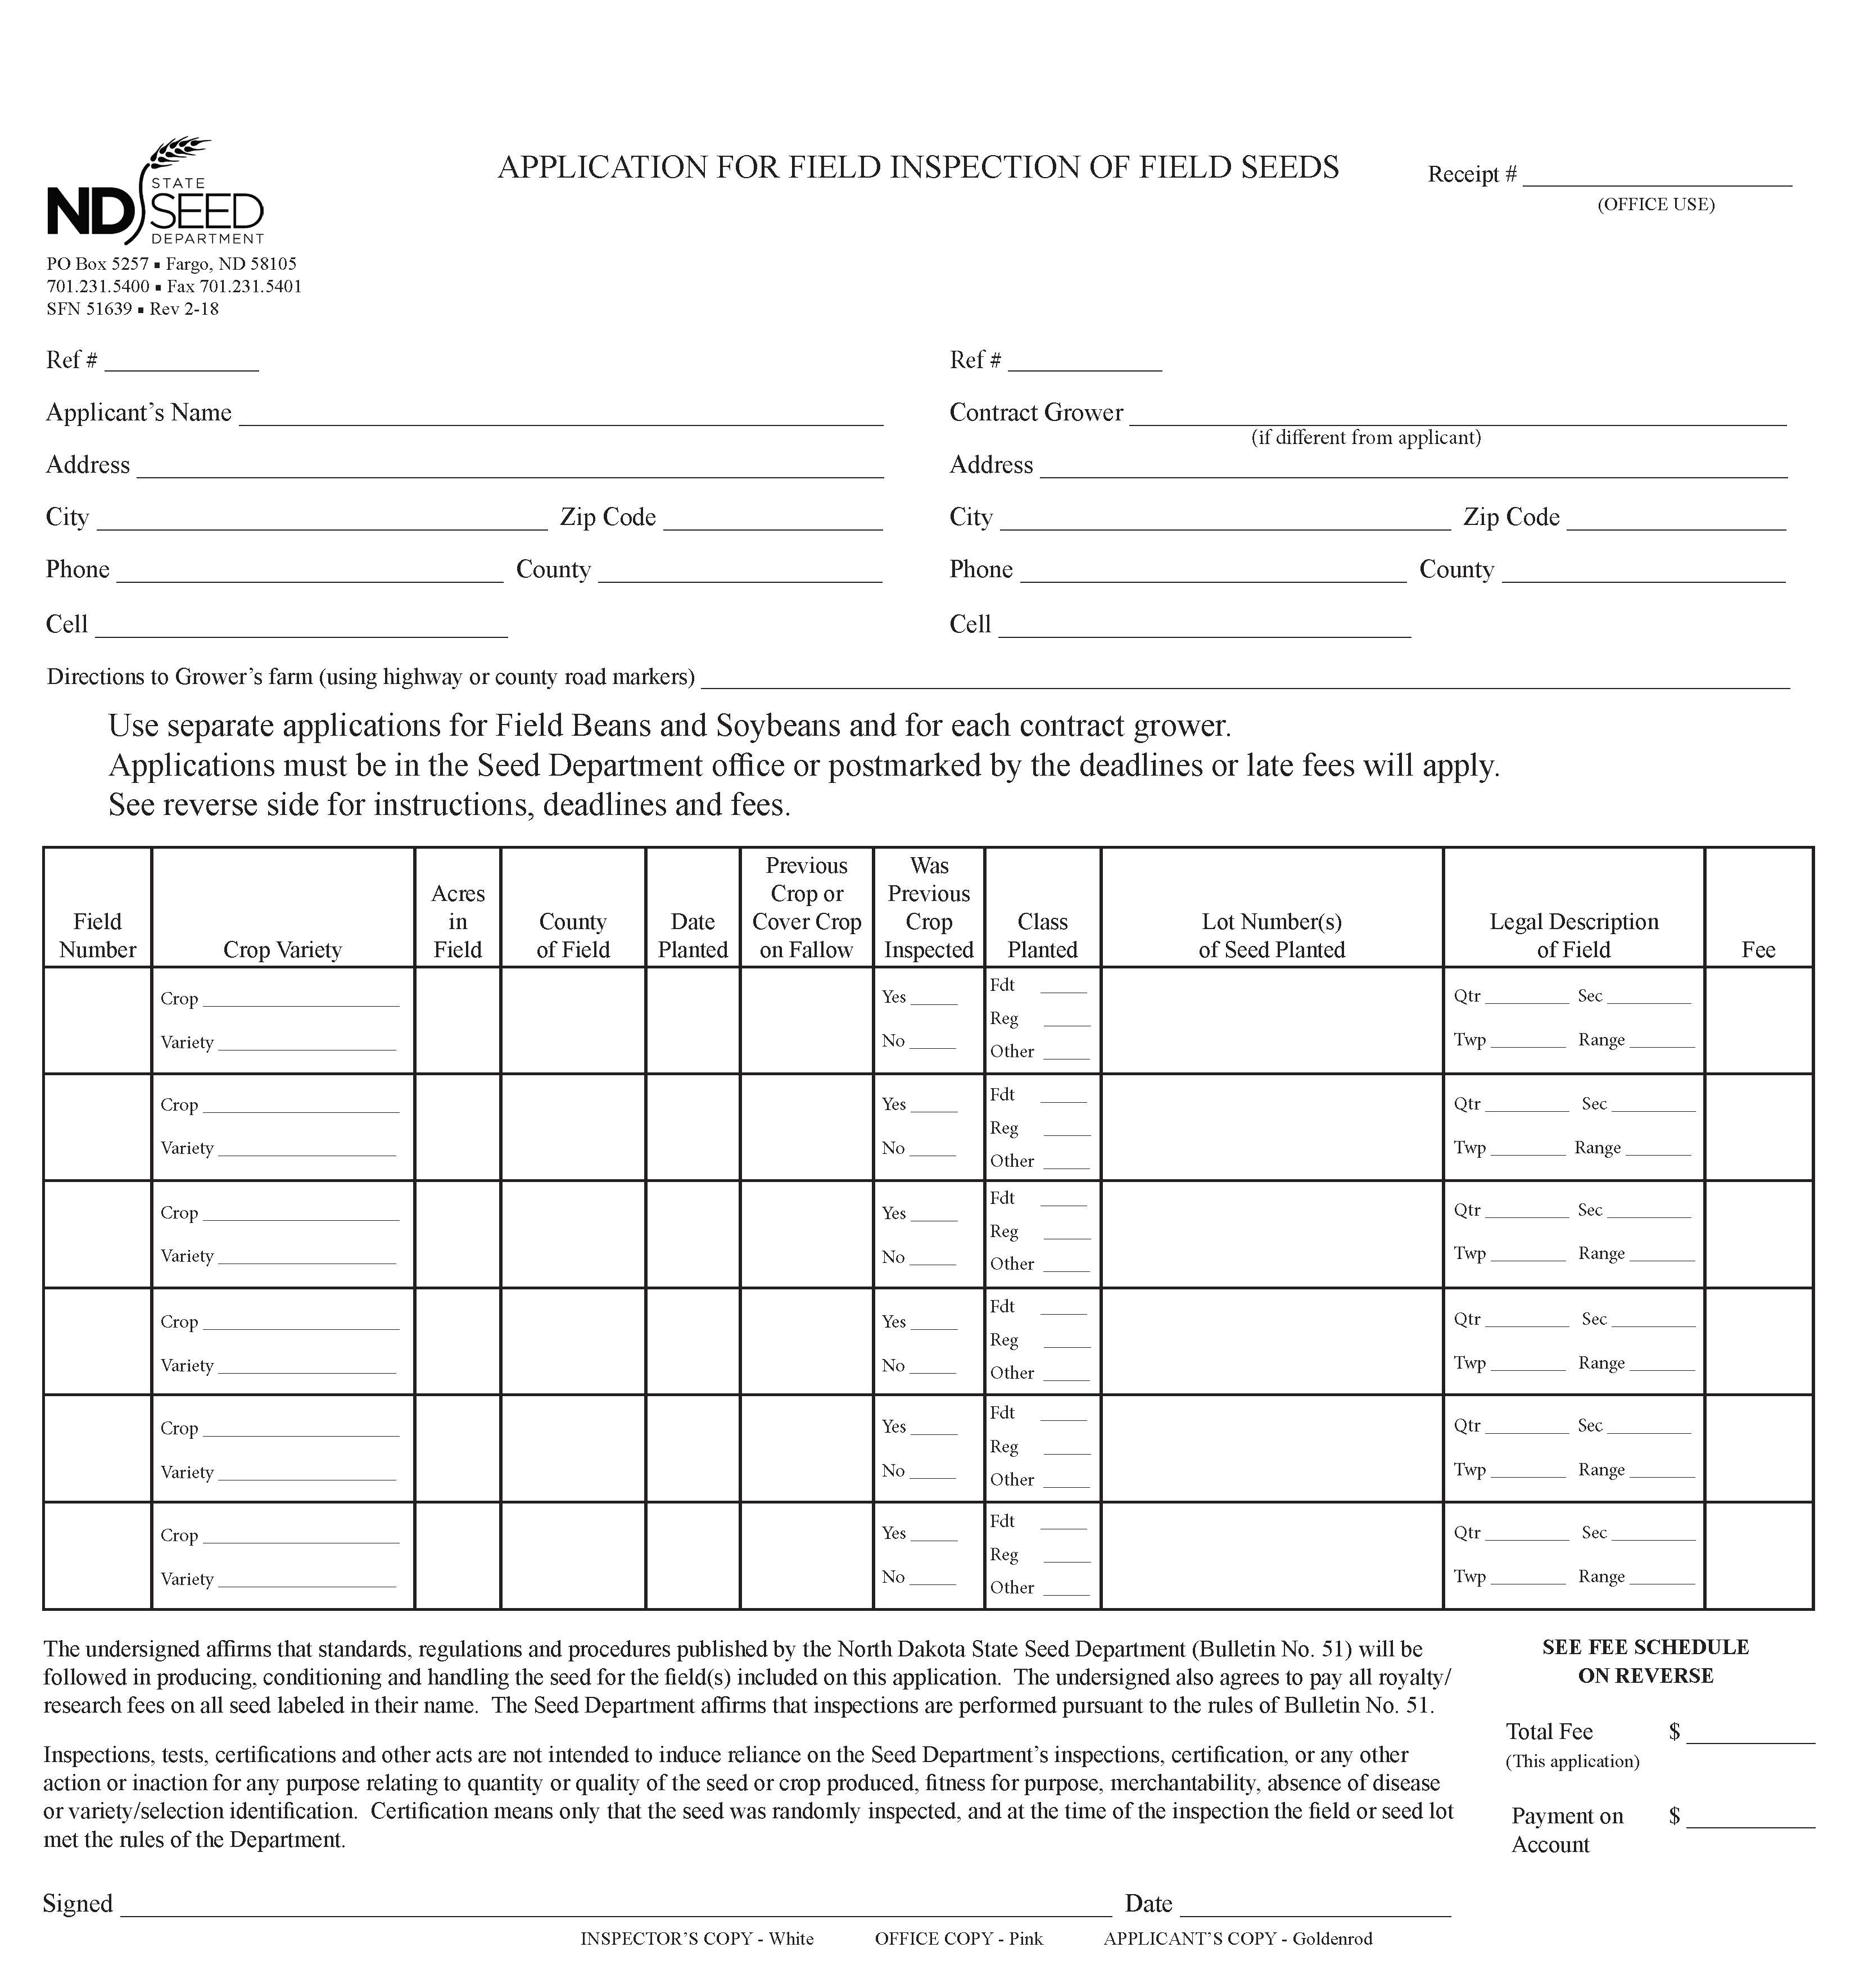 Application for Field Inspection of Field Seeds